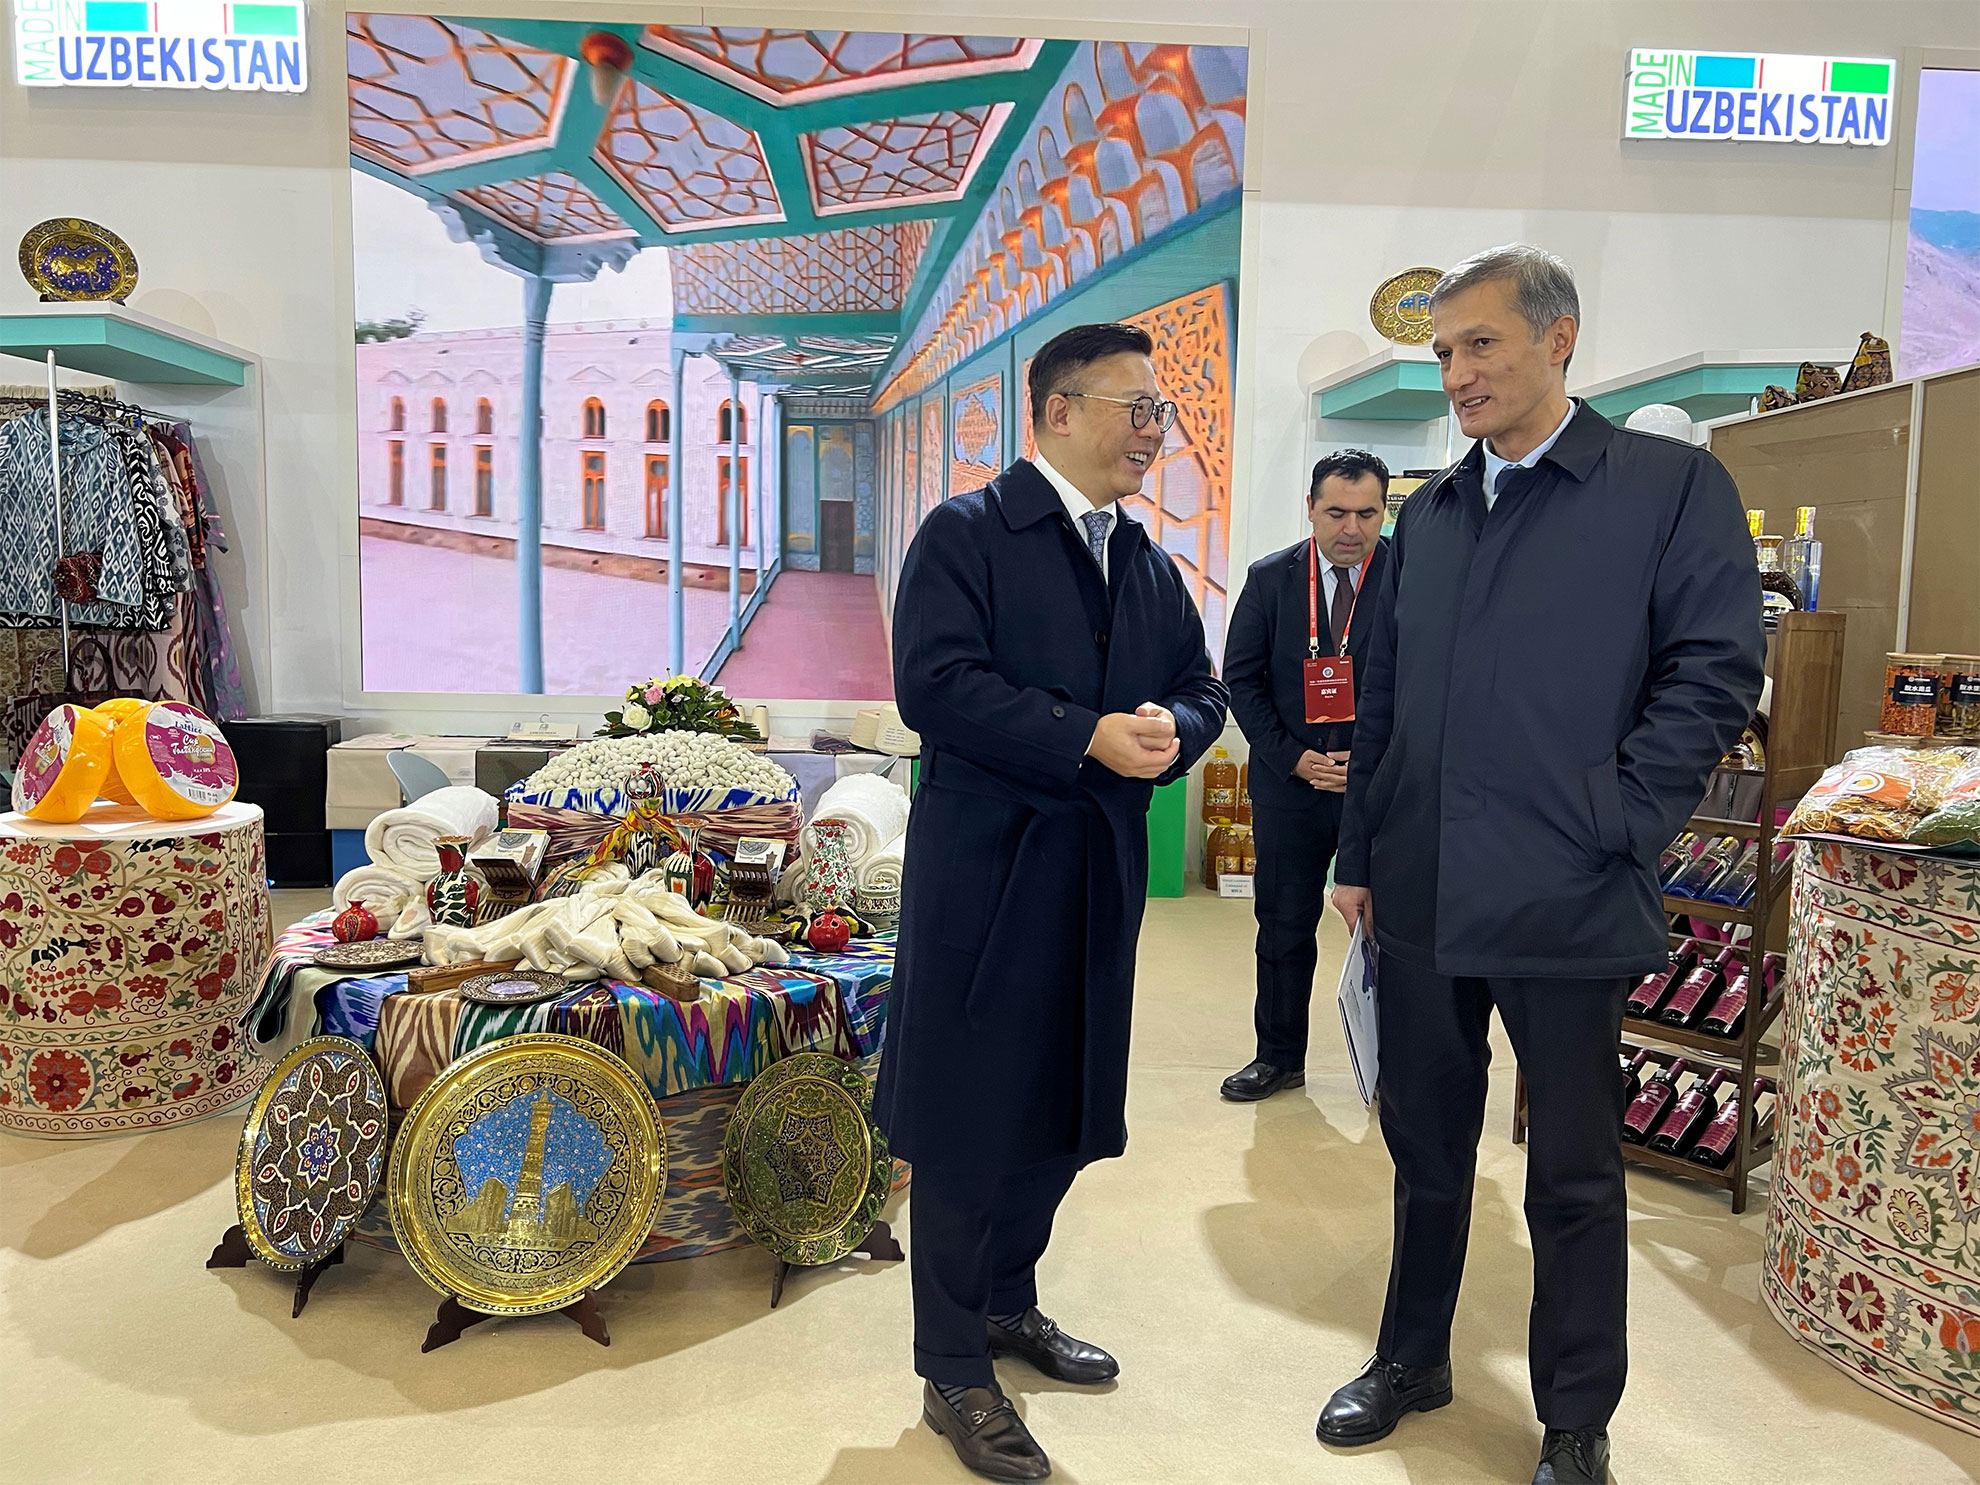 The Deputy Secretary for Justice, Mr Cheung Kwok-kwan, led a Hong Kong Special Administrative Region delegation to participate in a forum on China-Uzbekistan co-operation in Urumqi, Xinjiang today (January 22). Photo shows Mr Cheung (left) visiting an Uzbekistan product fair and chatting with the person-in-charge of one of the booths.